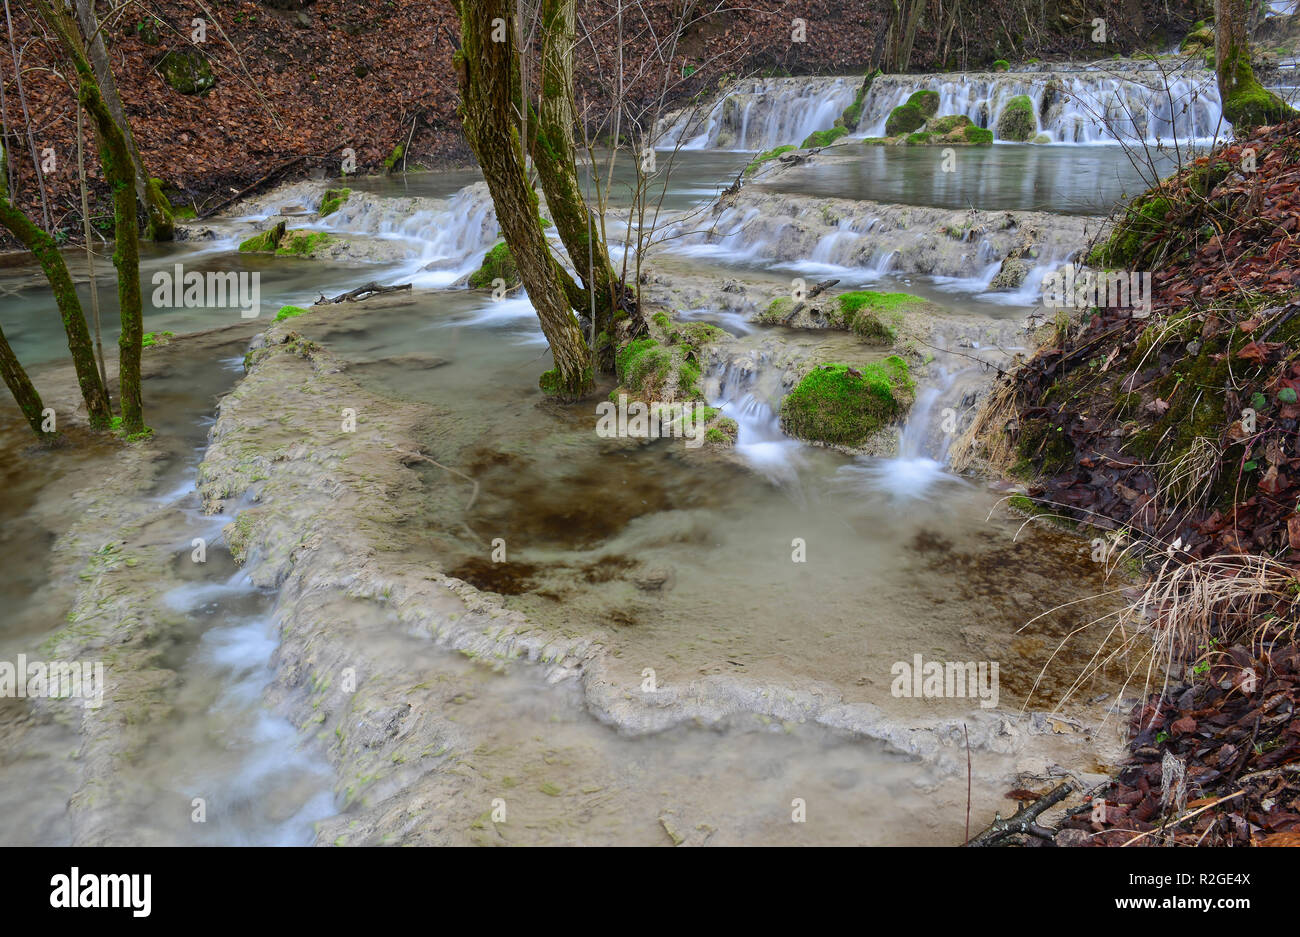 Several small bigar ponds in the form of cascade formed by limestone sedimentation, waterfalls, clear turquoise water of Bigar creek, Kalna, Serbia, c Stock Photo